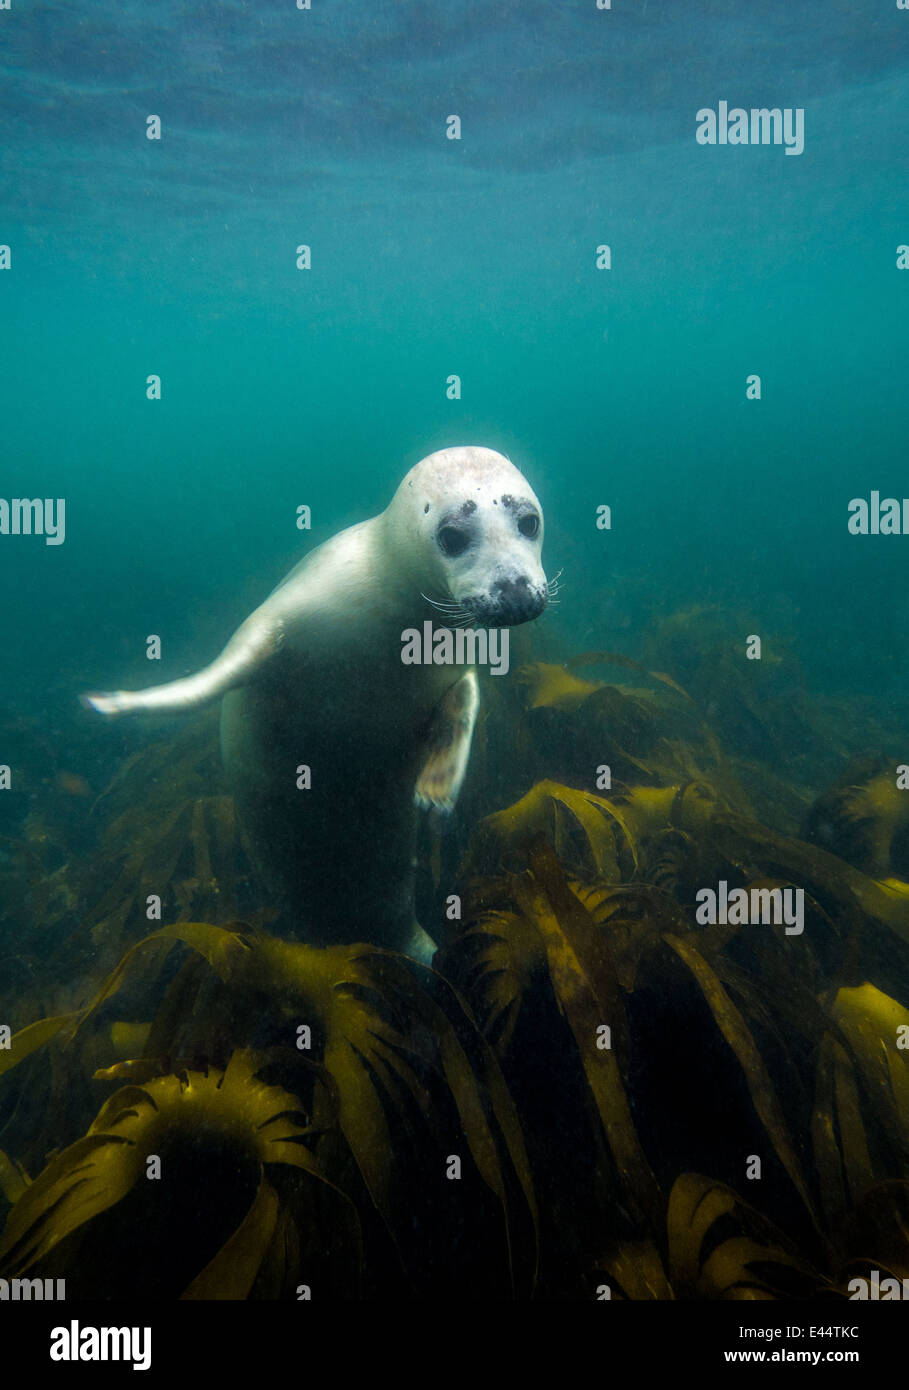 Underwater picture of grey seal in North Sea Stock Photo